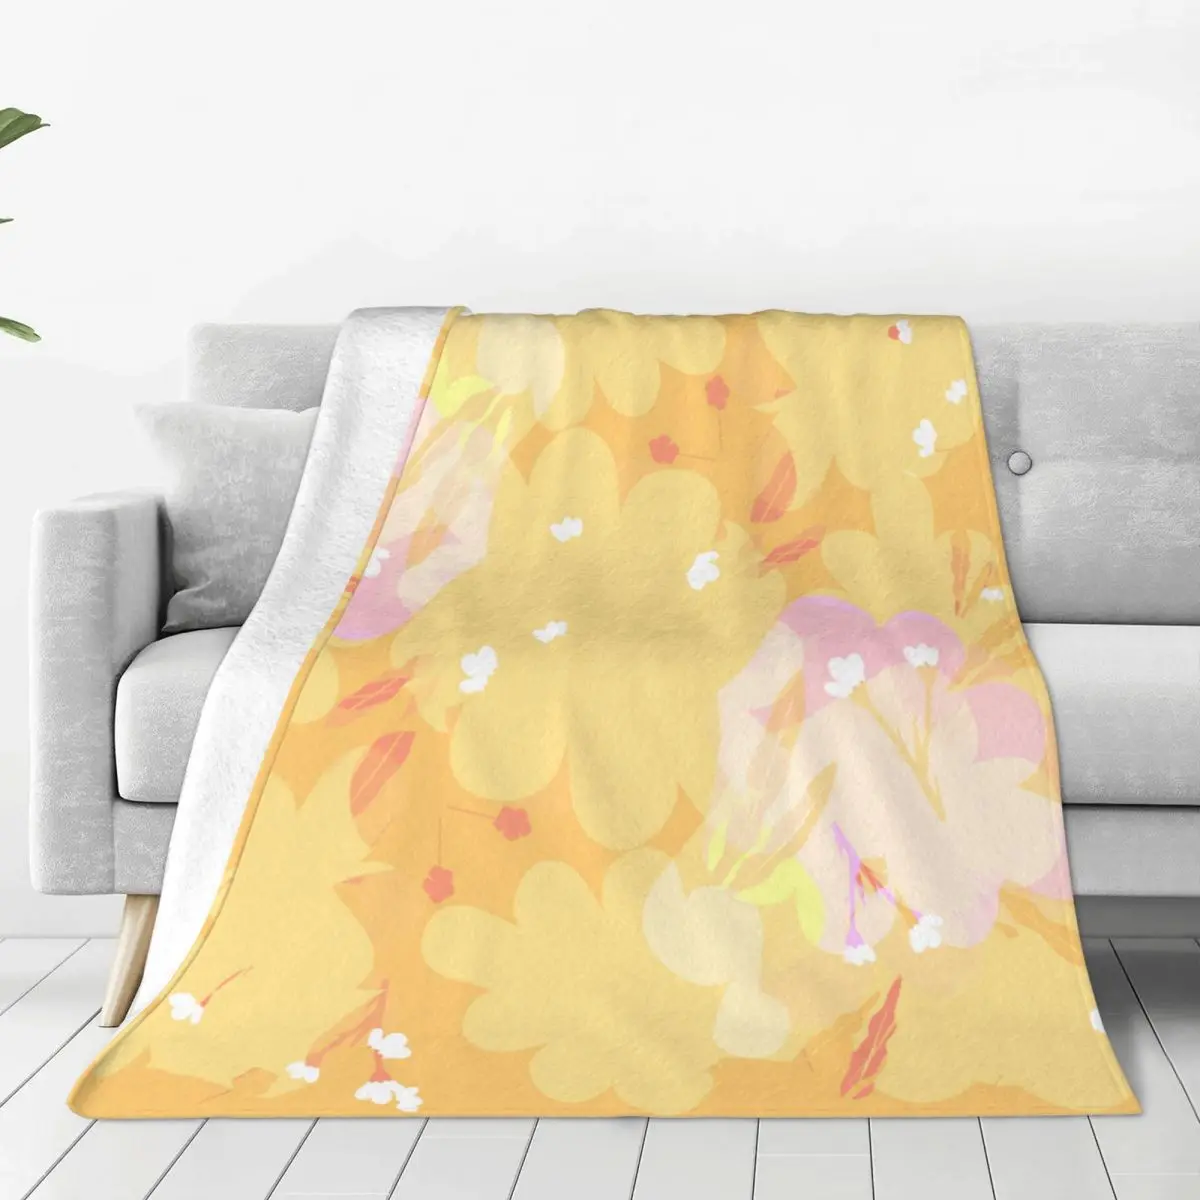 

Lovely Flowers Blanket Ultra Soft Cozy Blooming Flowers Decorative Flannel Blanket All Season For Home Couch Bed Chair Travel